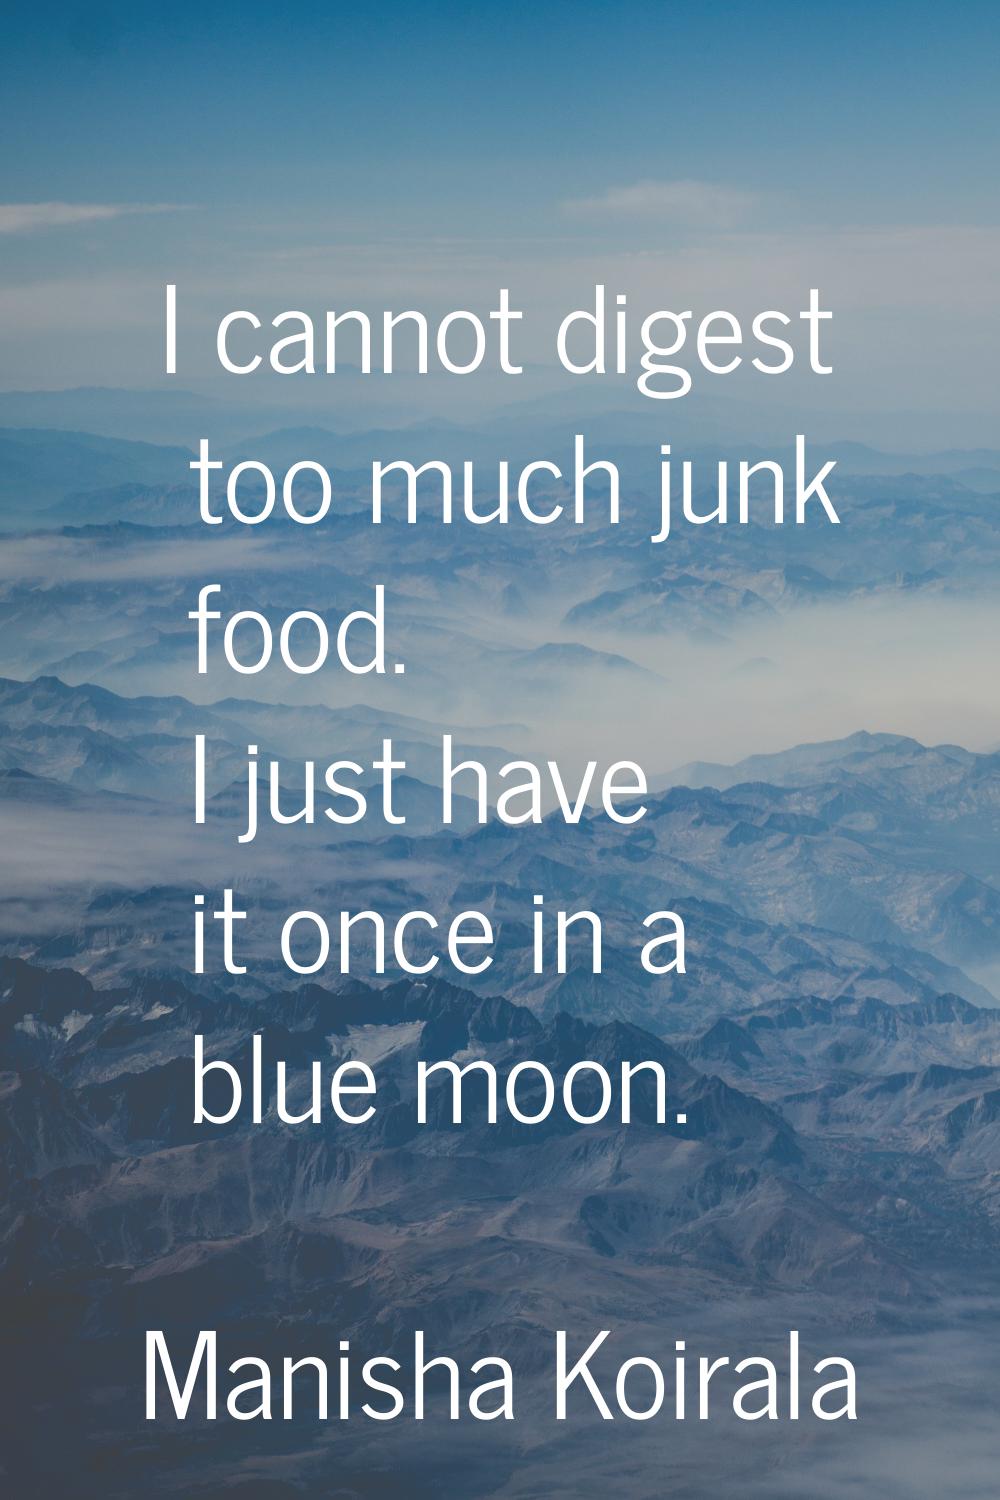 I cannot digest too much junk food. I just have it once in a blue moon.